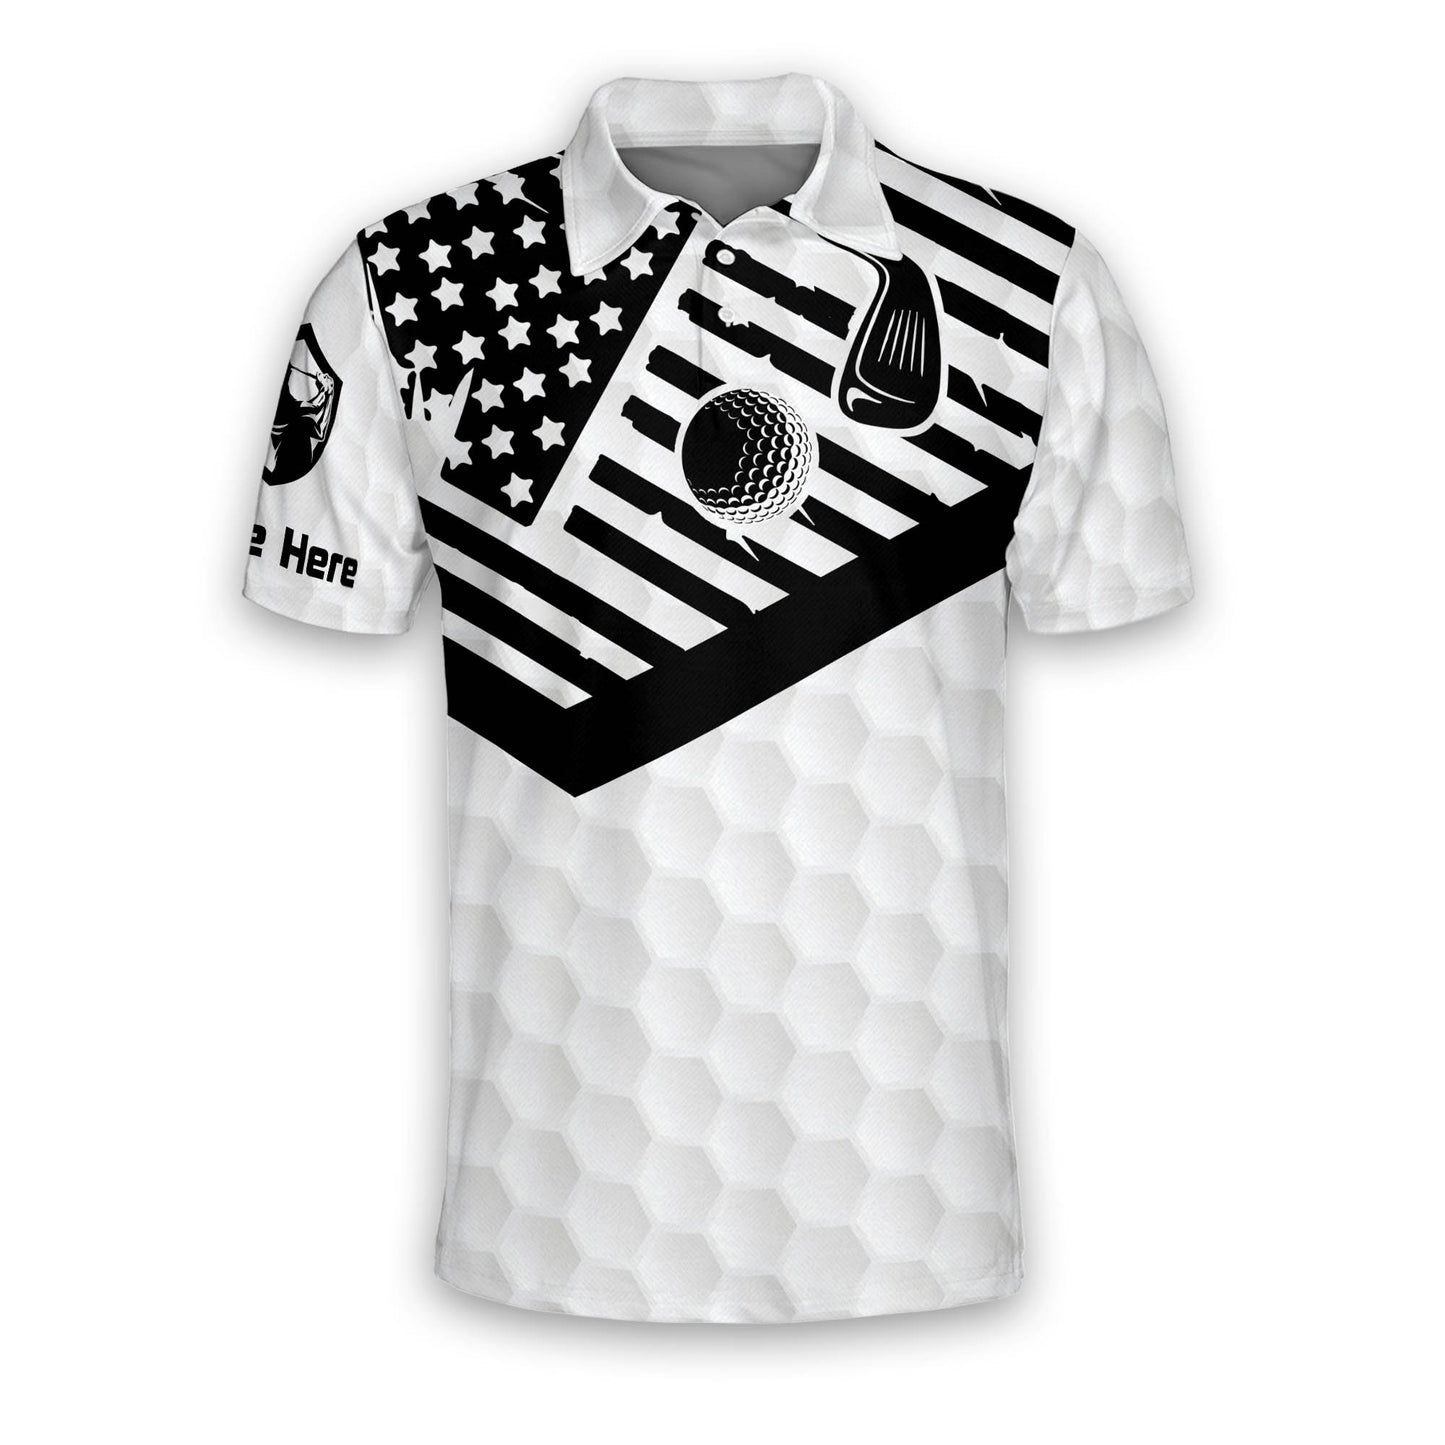 I Don't Need Therapy I Just Need To Play Golf Polo Shirt GM0067